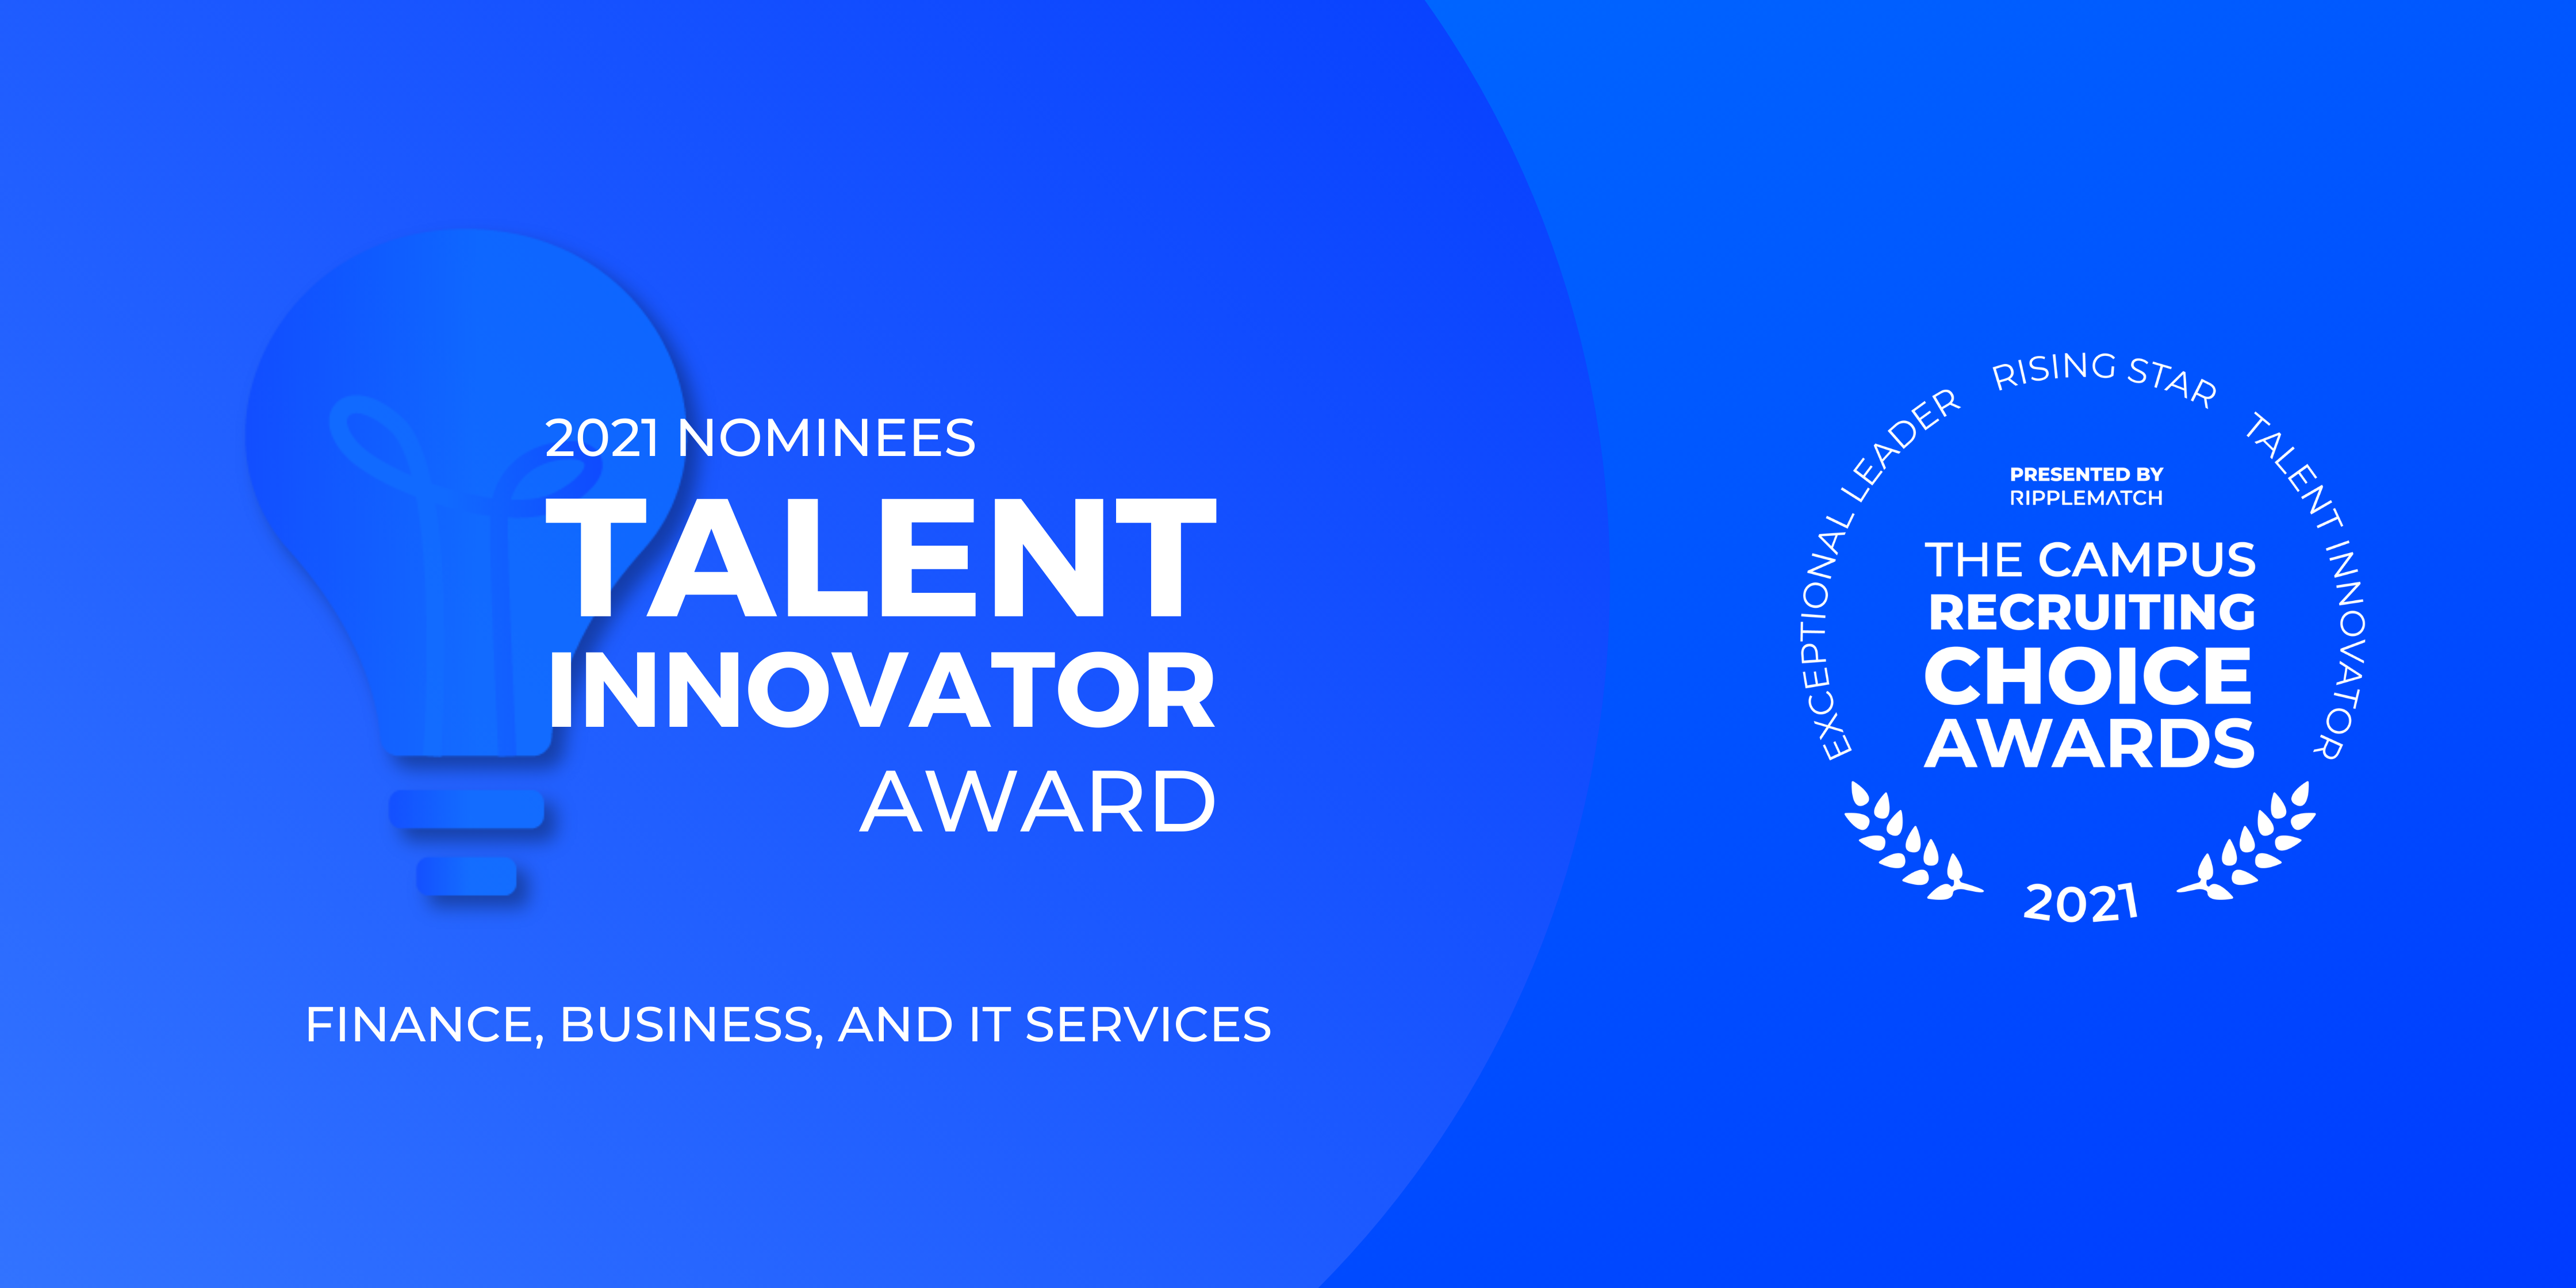 Talent Innovator Award - Finance, Business, and IT Services